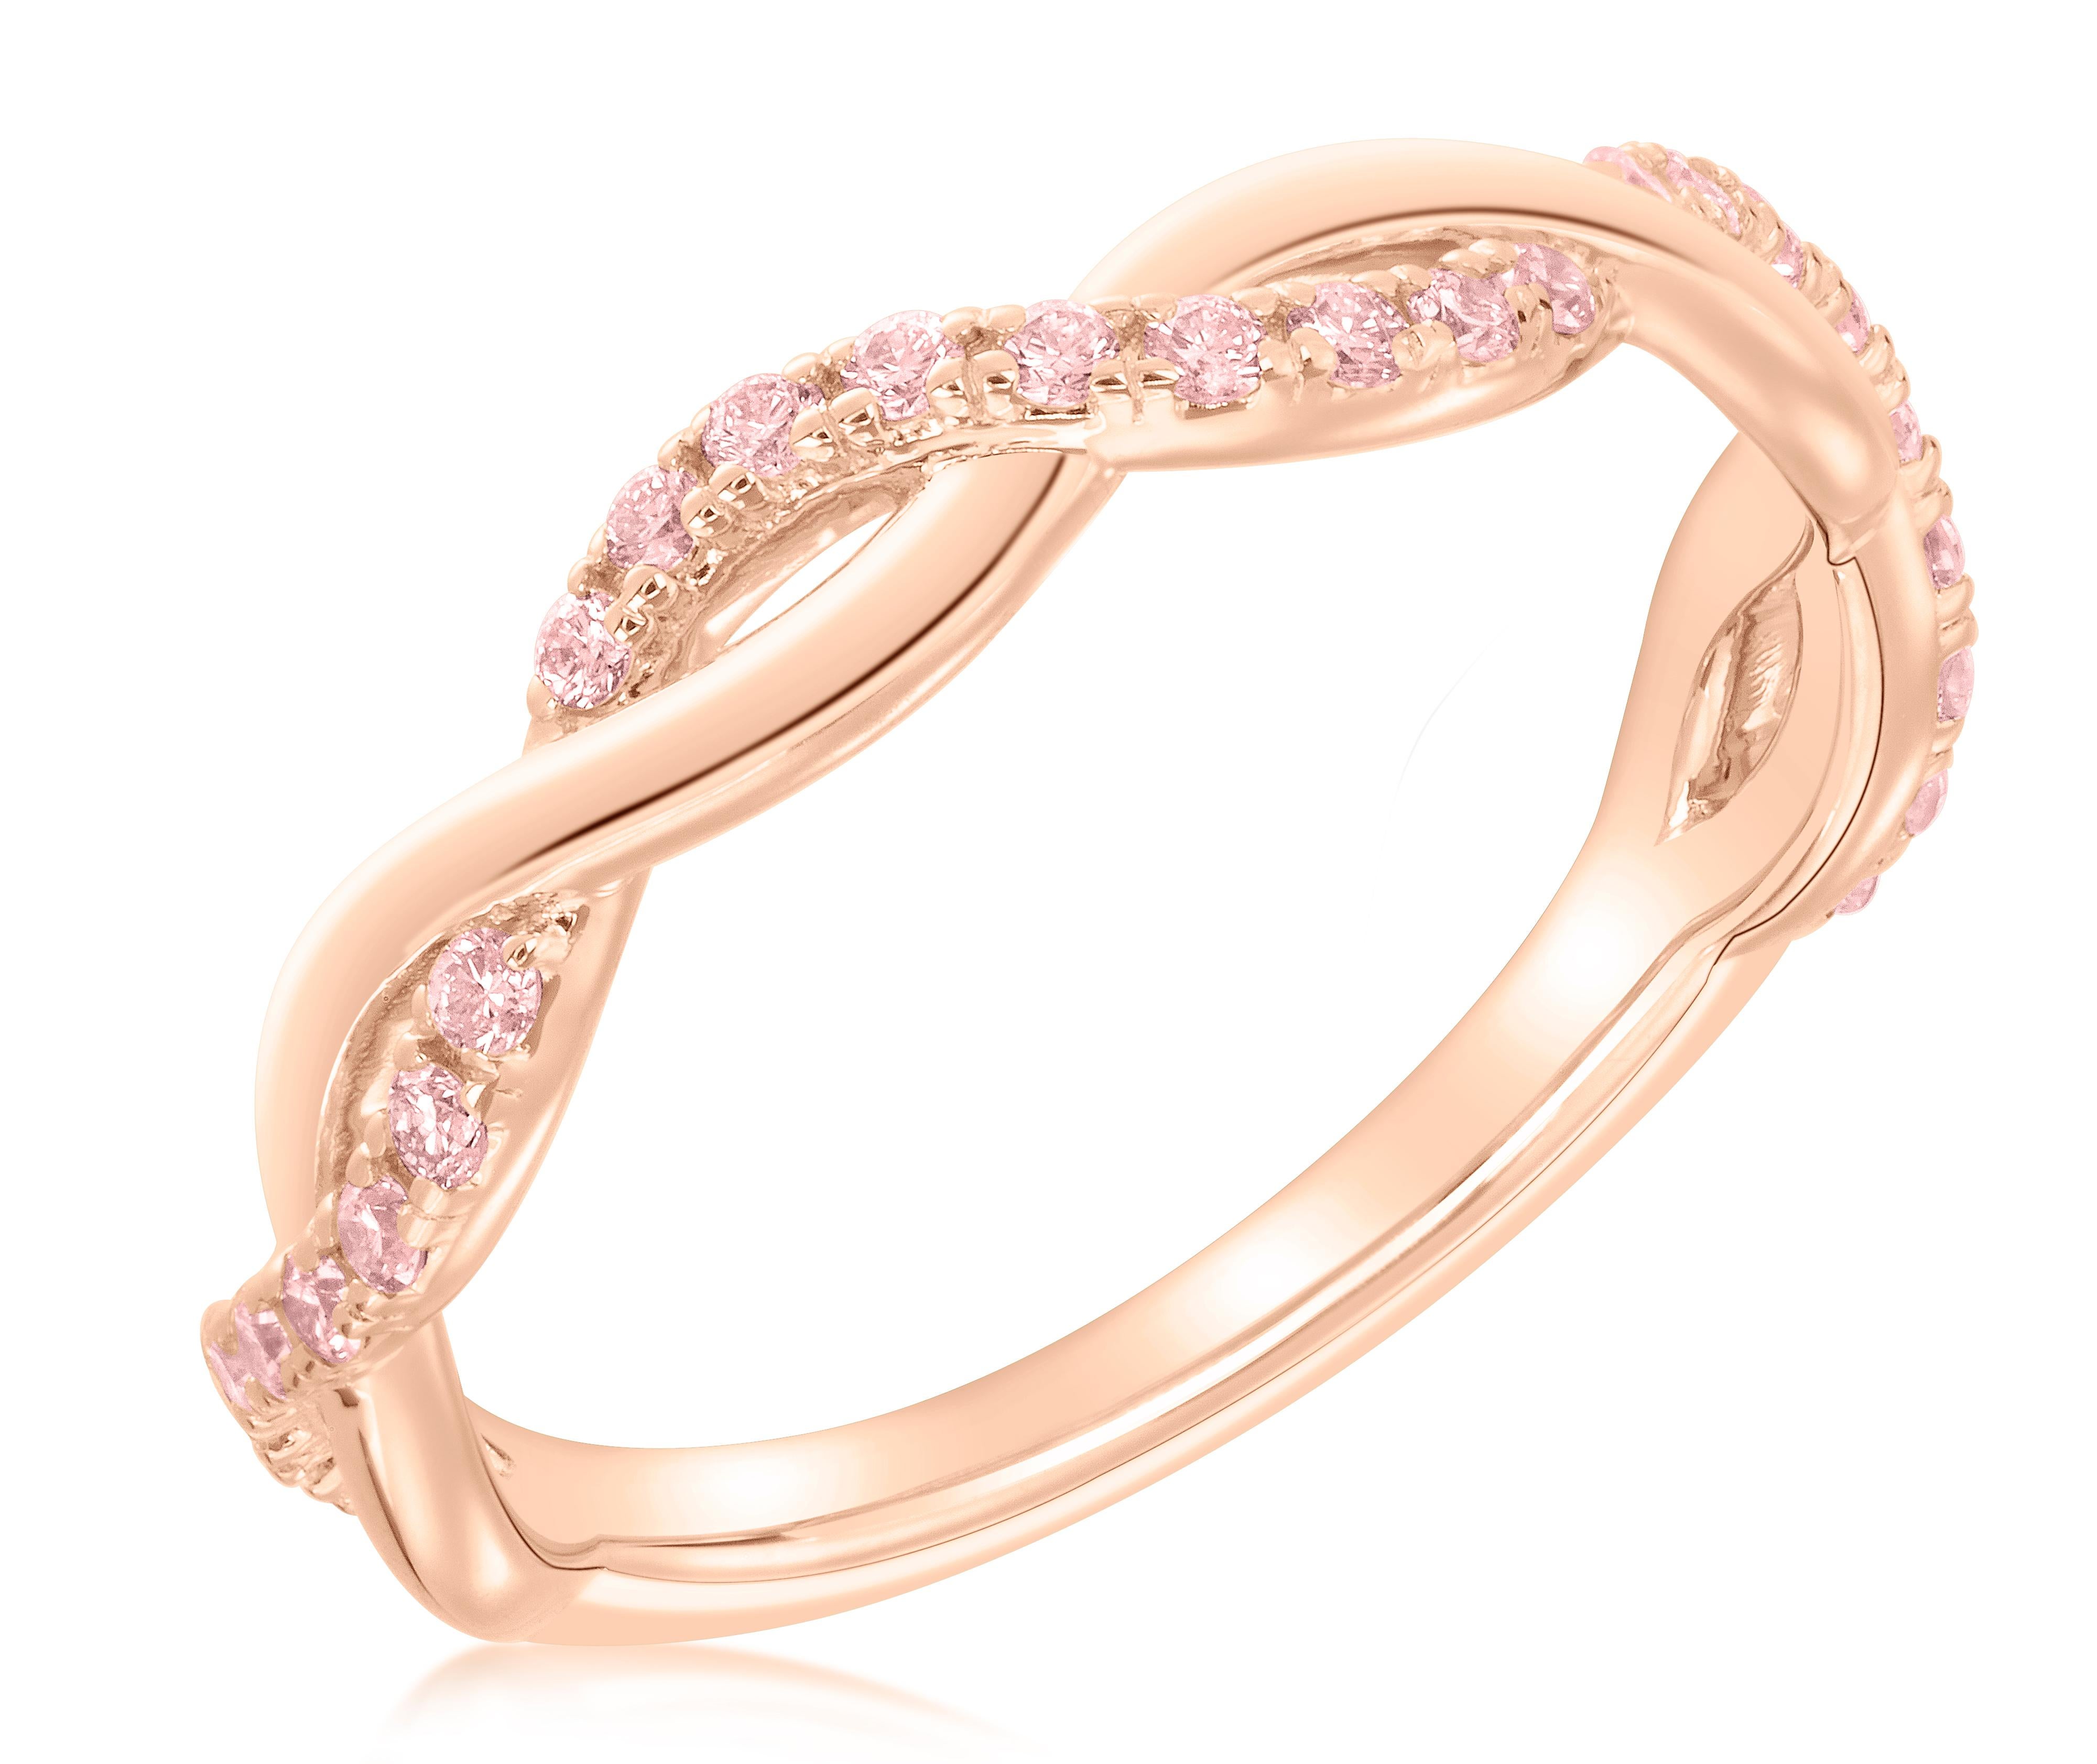 Add some sparkle and rarity to your finger with this stunning stackable twist band featuring 27 natural argyle pink diamonds weighing .27 carats. The band is set in 14k rose gold and is sized at 6.5, but can be adjusted to your finger size. These